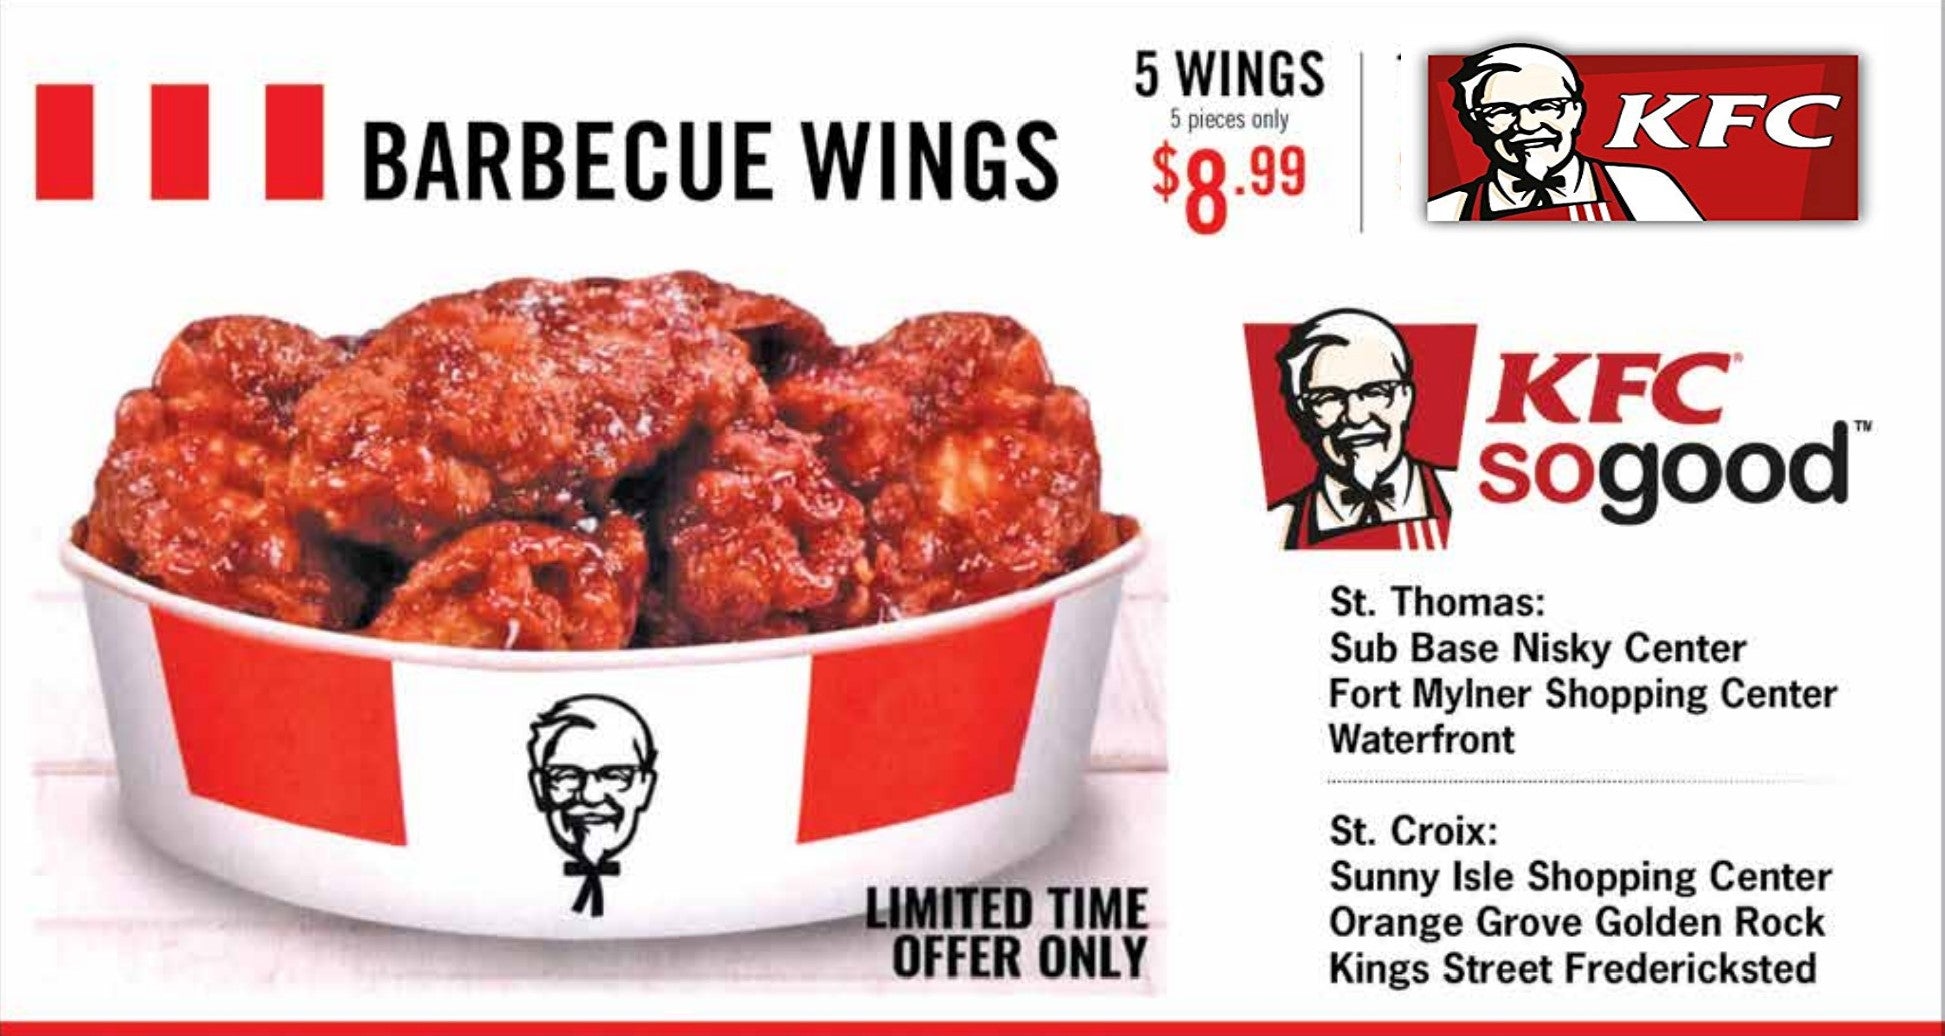 KFC 5 PIECE BARBEQUE WINGS (CHICKEN ONLY)